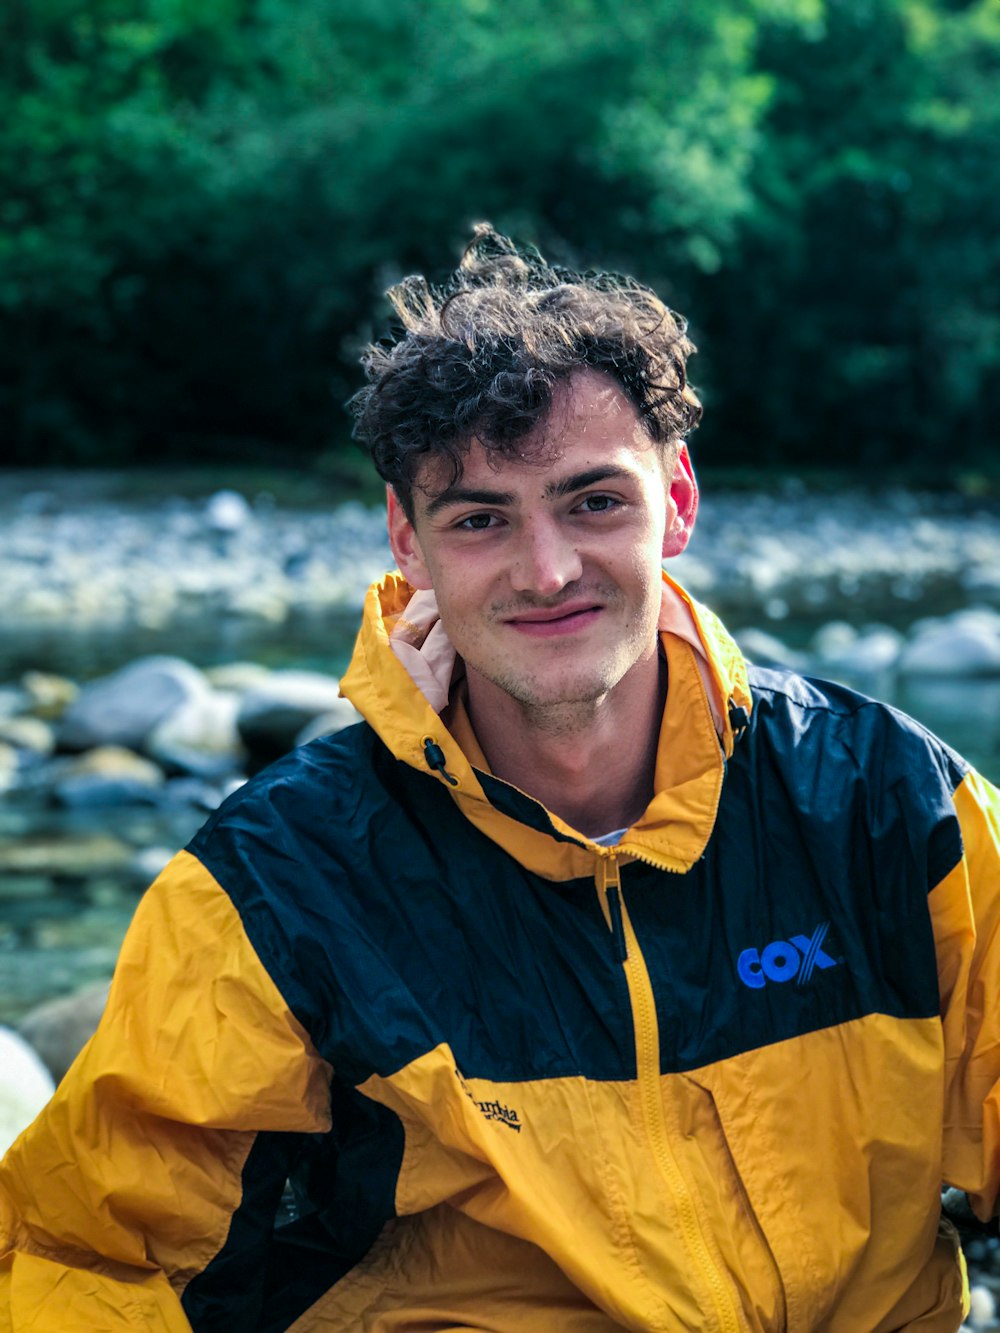 man in yellow and blue zip up jacket standing near river during daytime